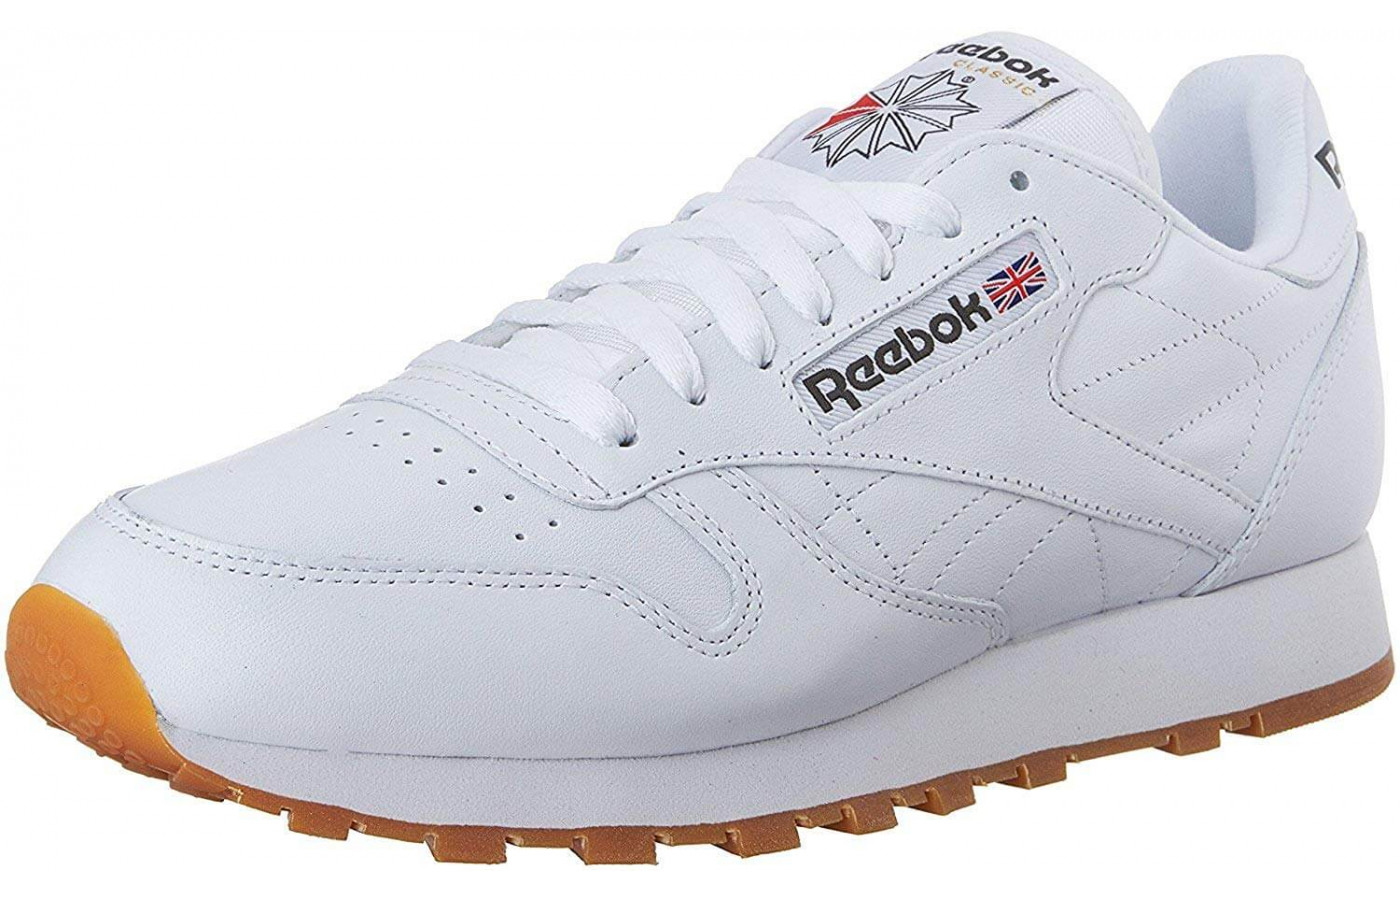 Reebok Leather Fully for Quality RunnerClick